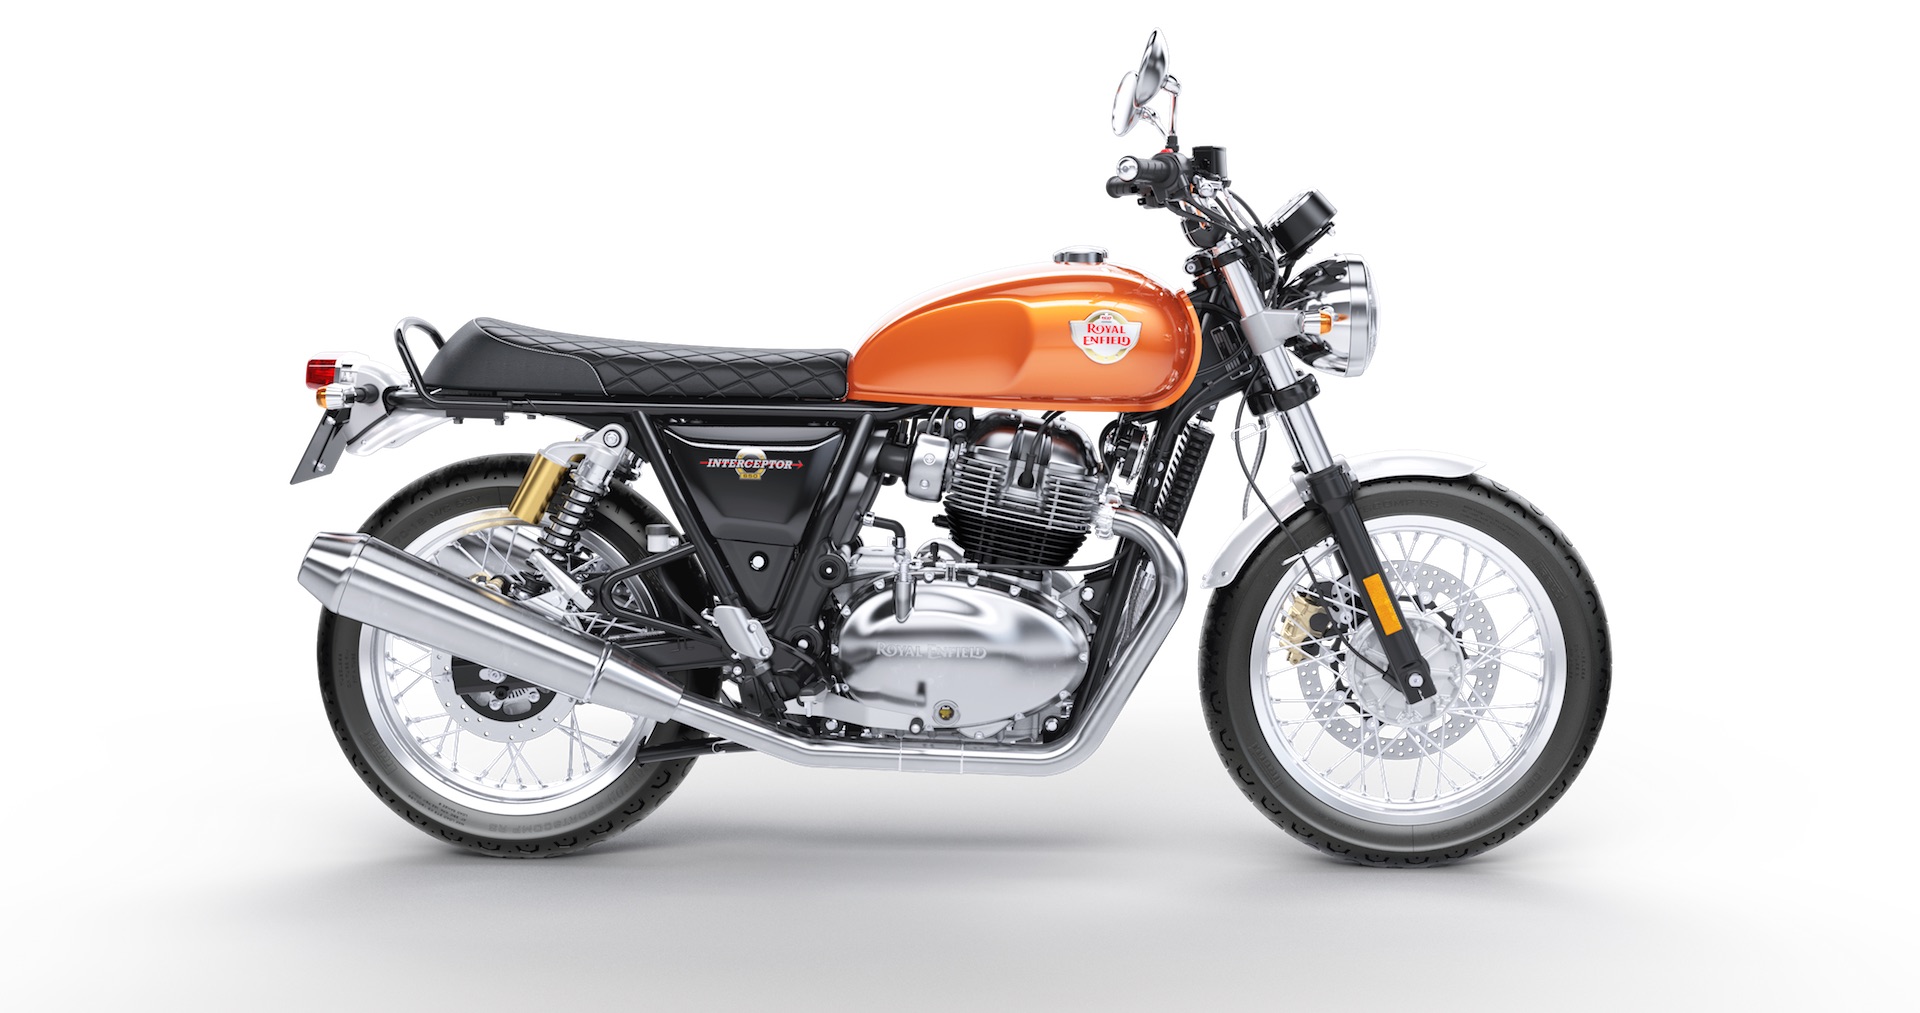 10 Best Air Cooled Motorcycles For 2021- Motorcycles in Retro Style